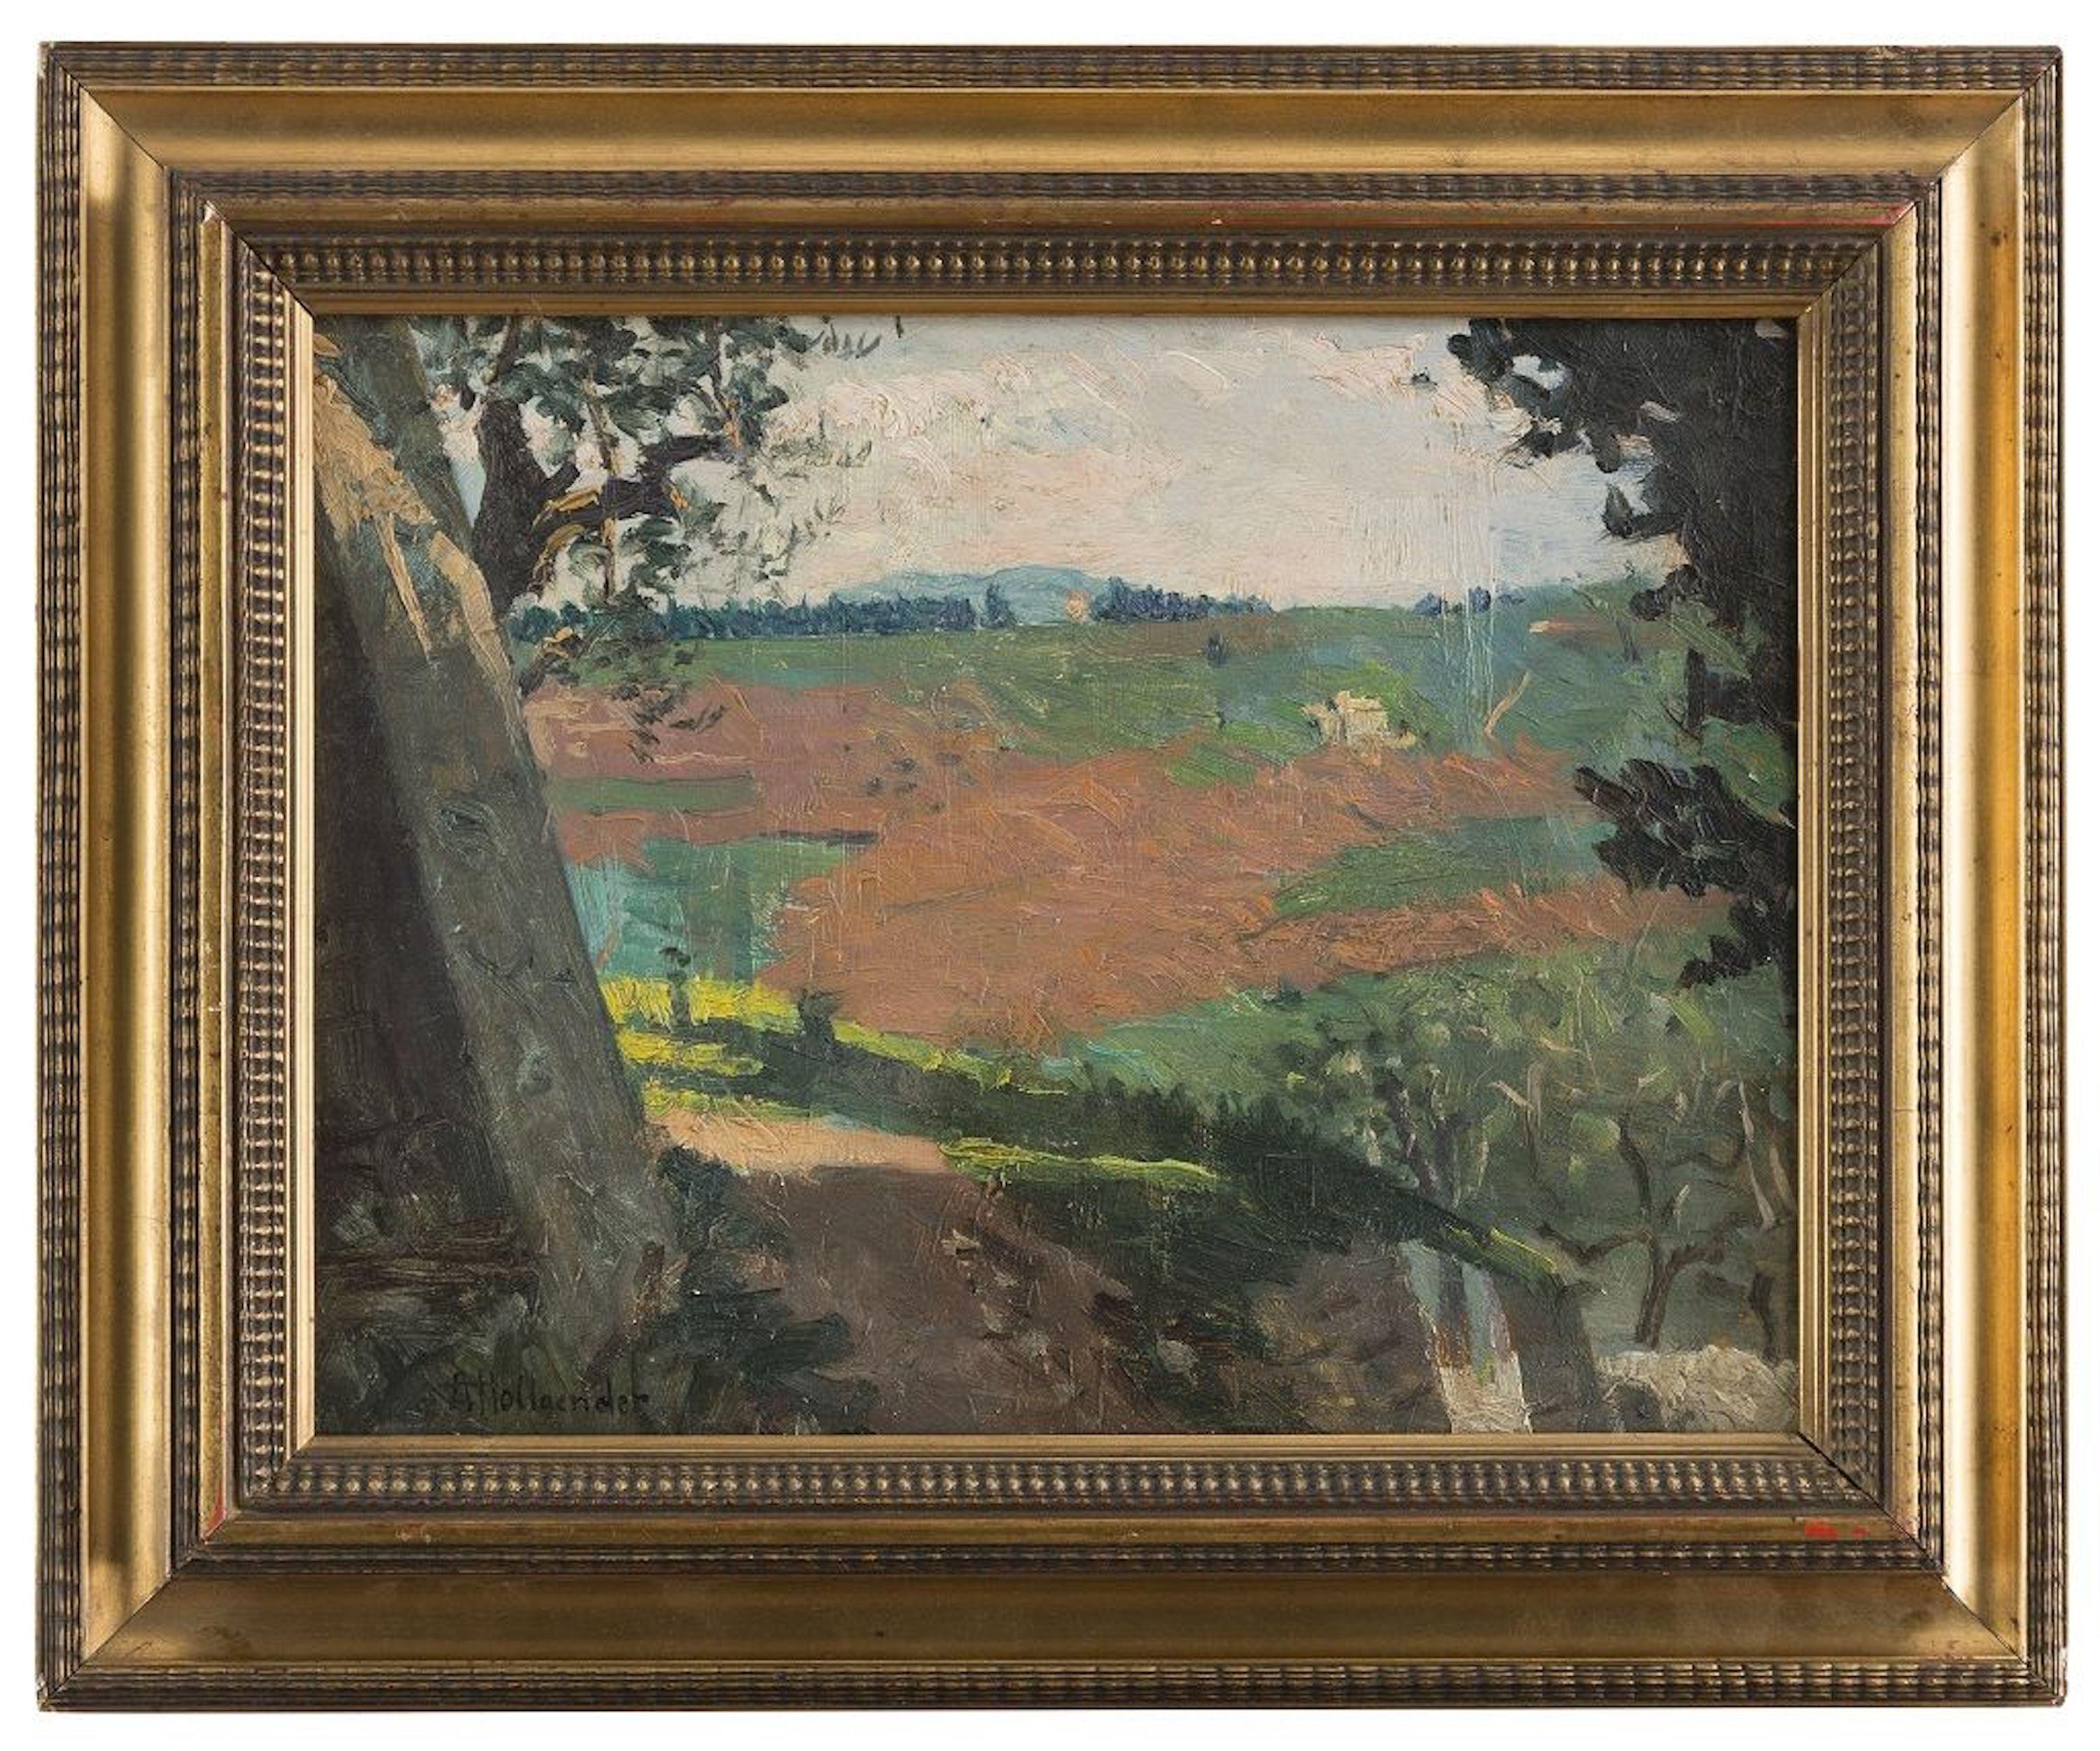 Landscape - Oil on Cardboard by A. Hollaender - Late 19th Century - Painting by Alfonso Hollaender